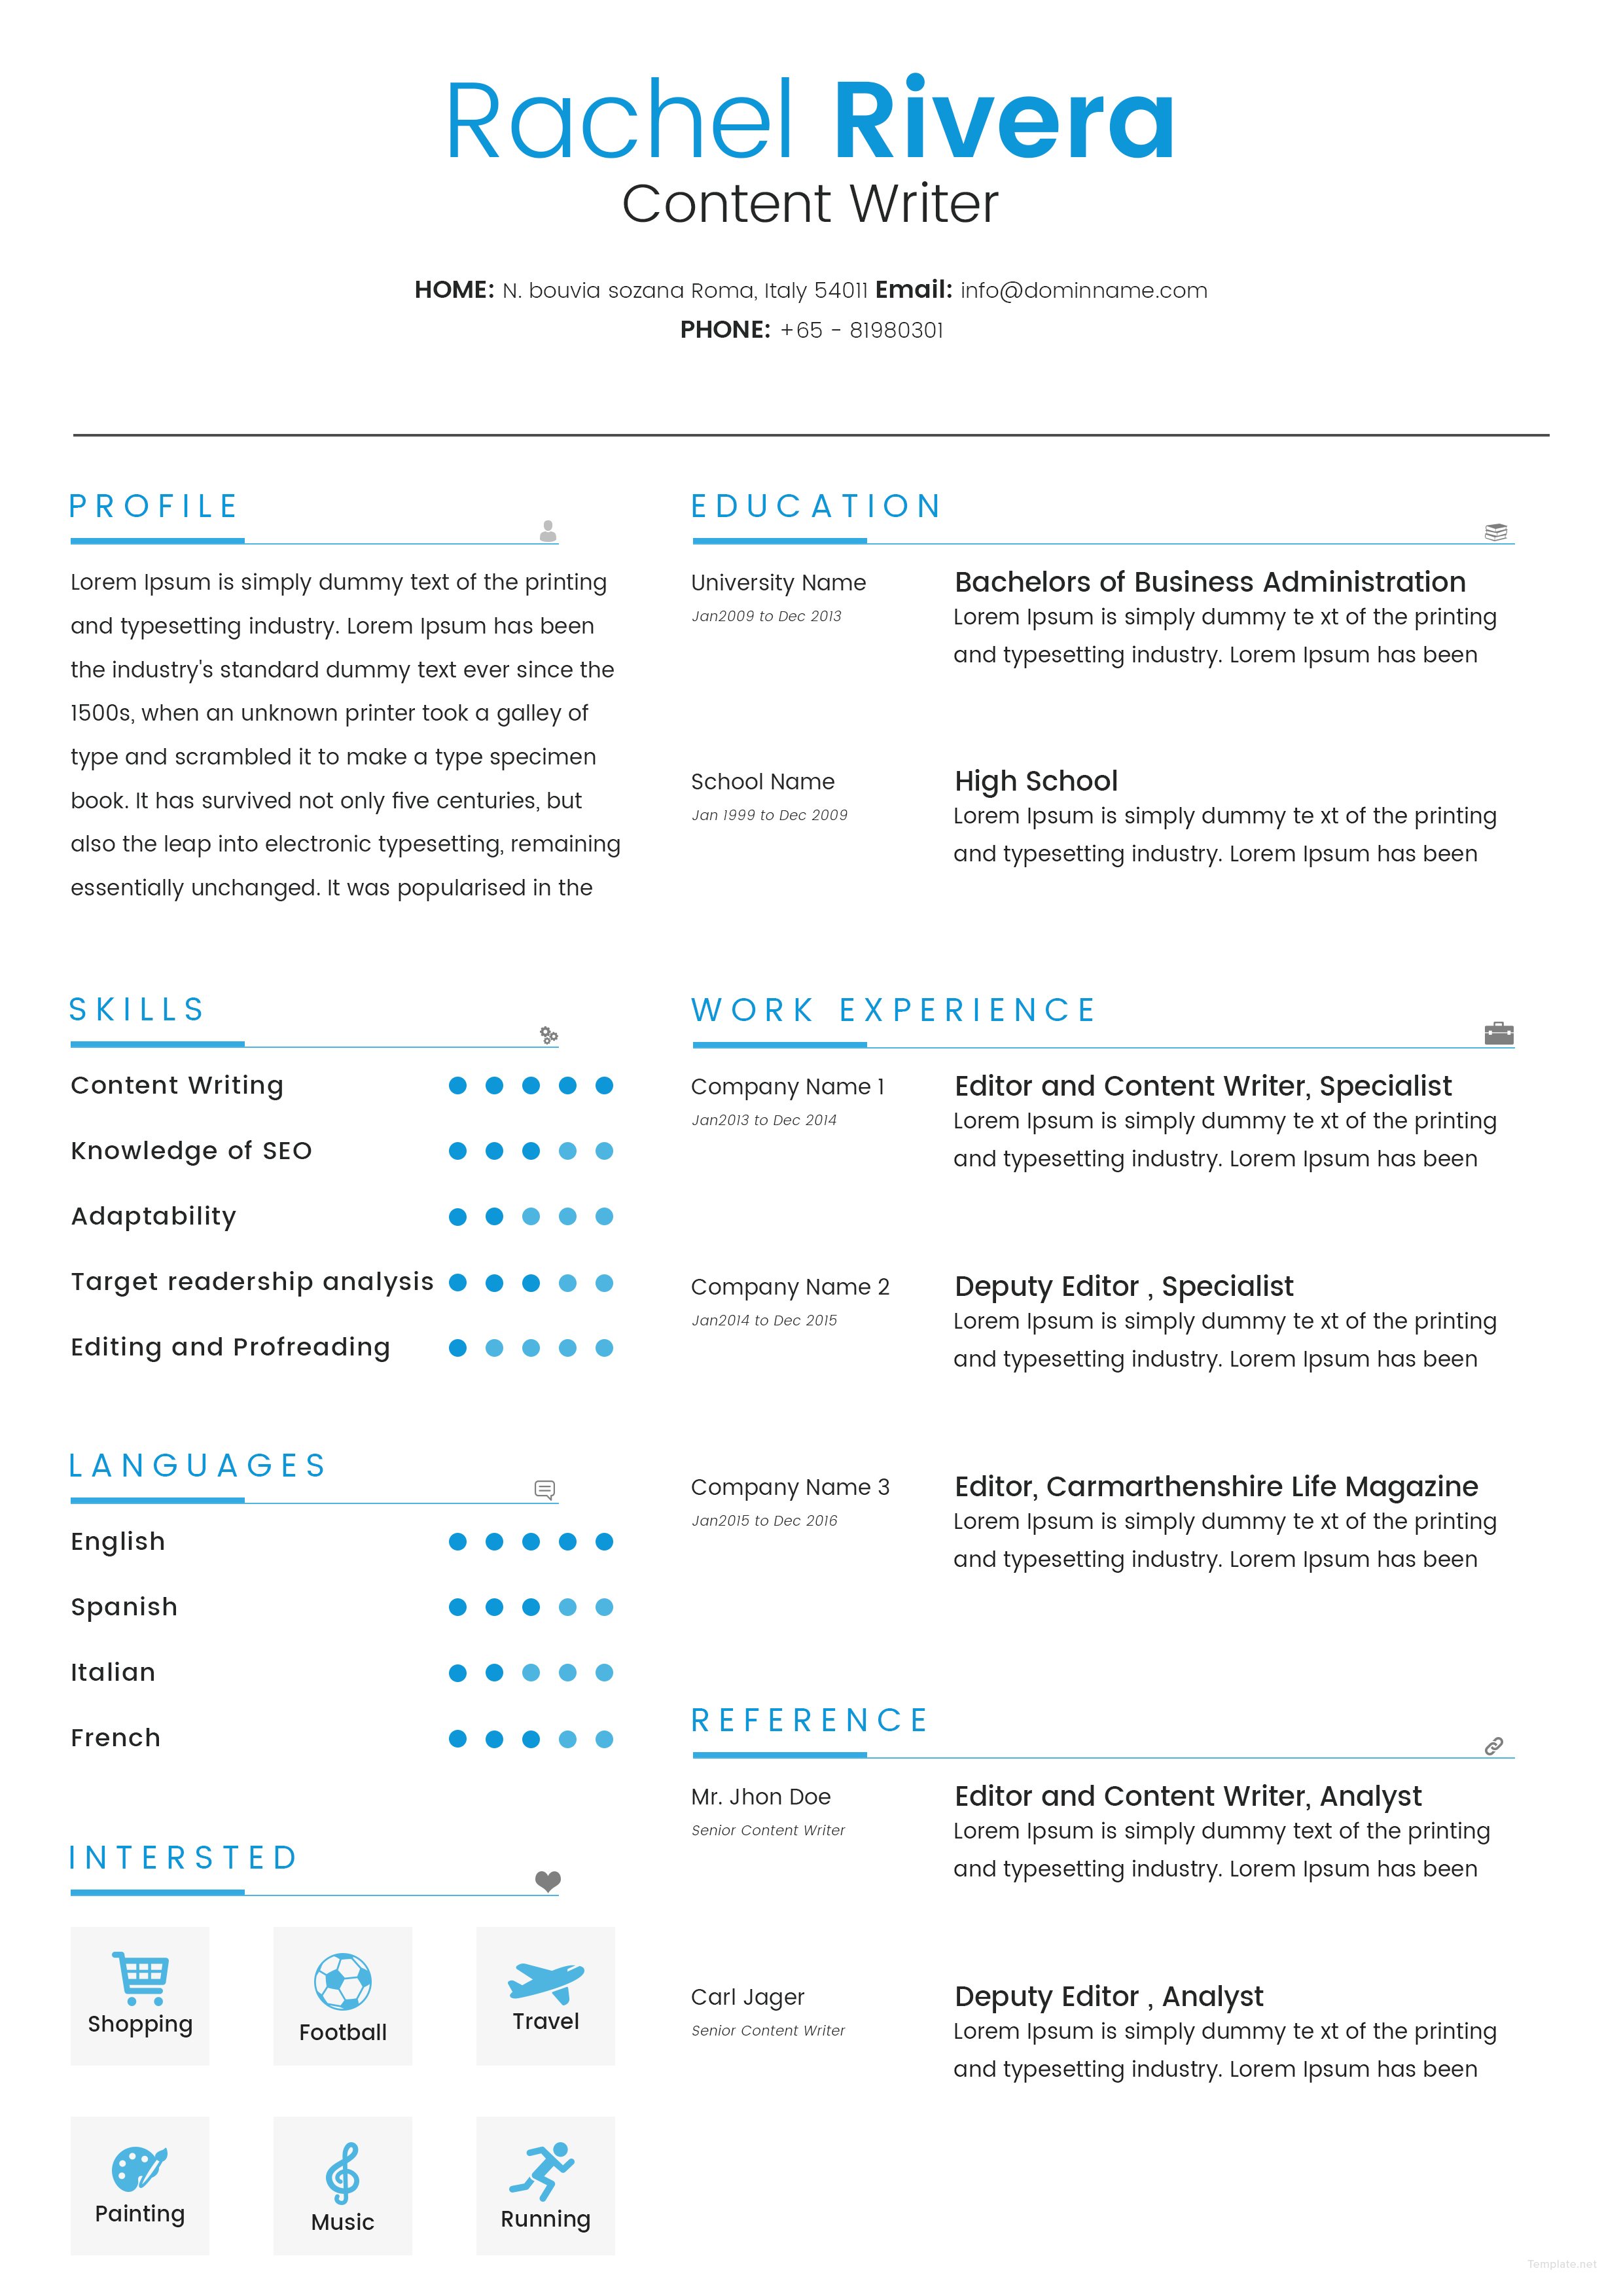 Free Content Writer Resume Template in Adobe Microsoft Word